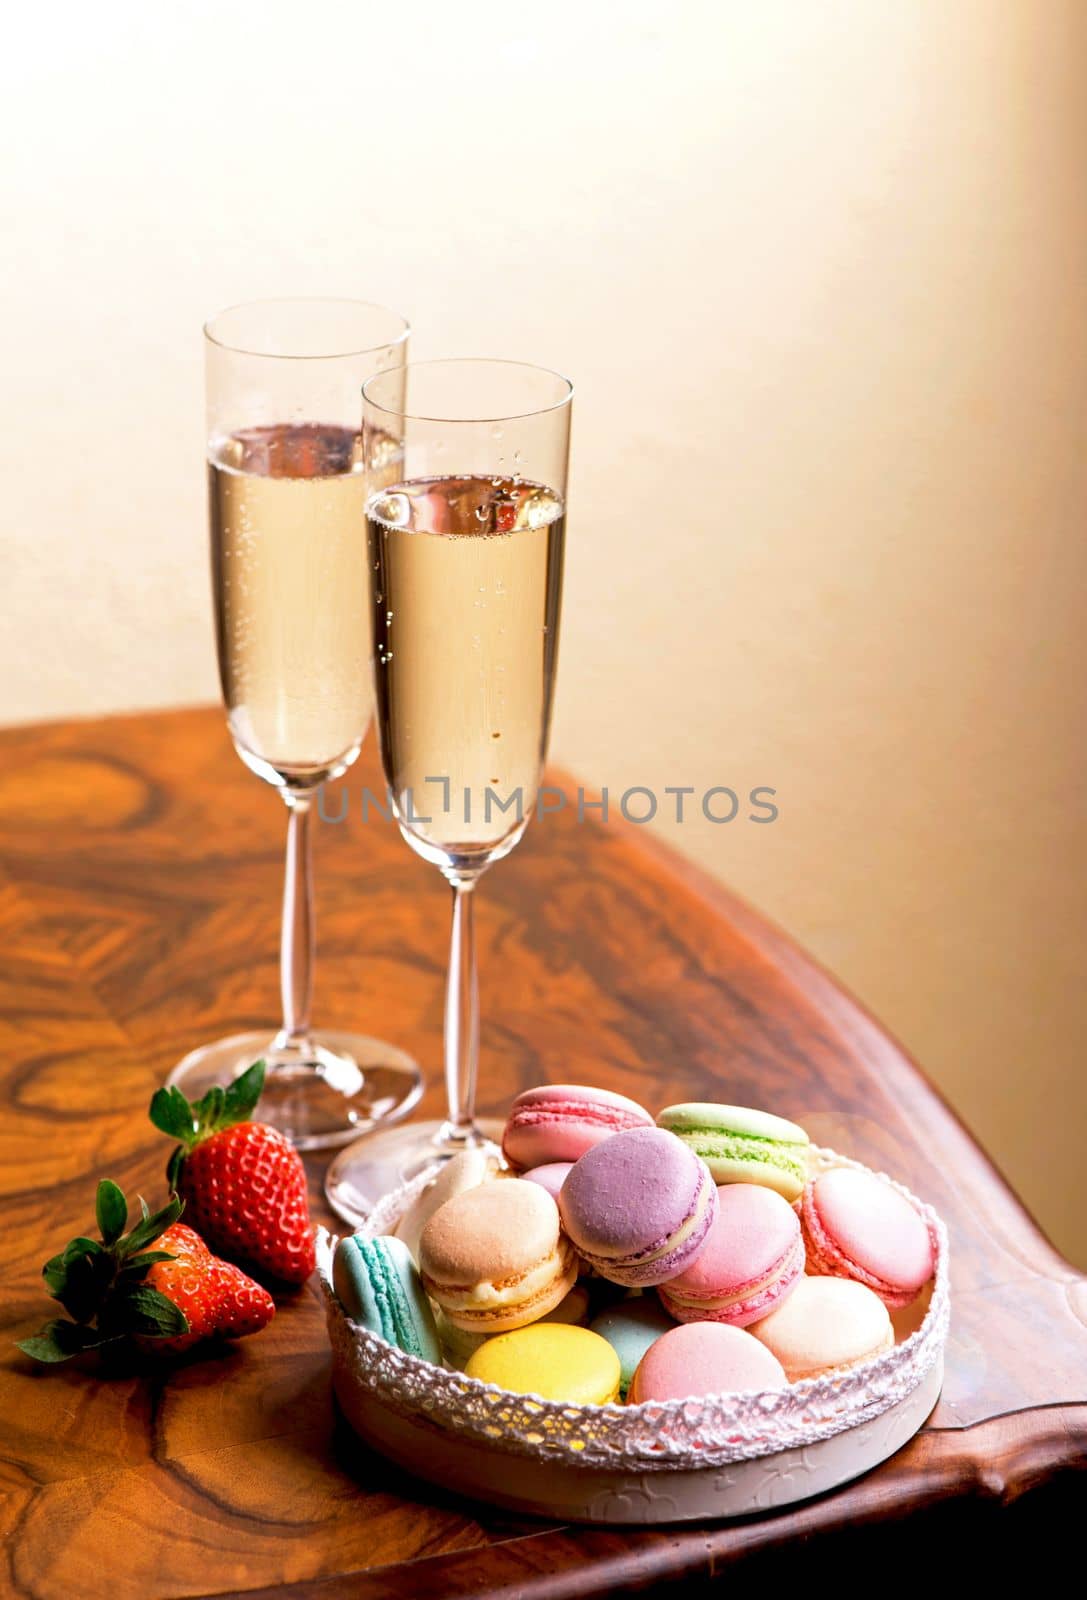 champagne and macarons with strawberries on a wooden table